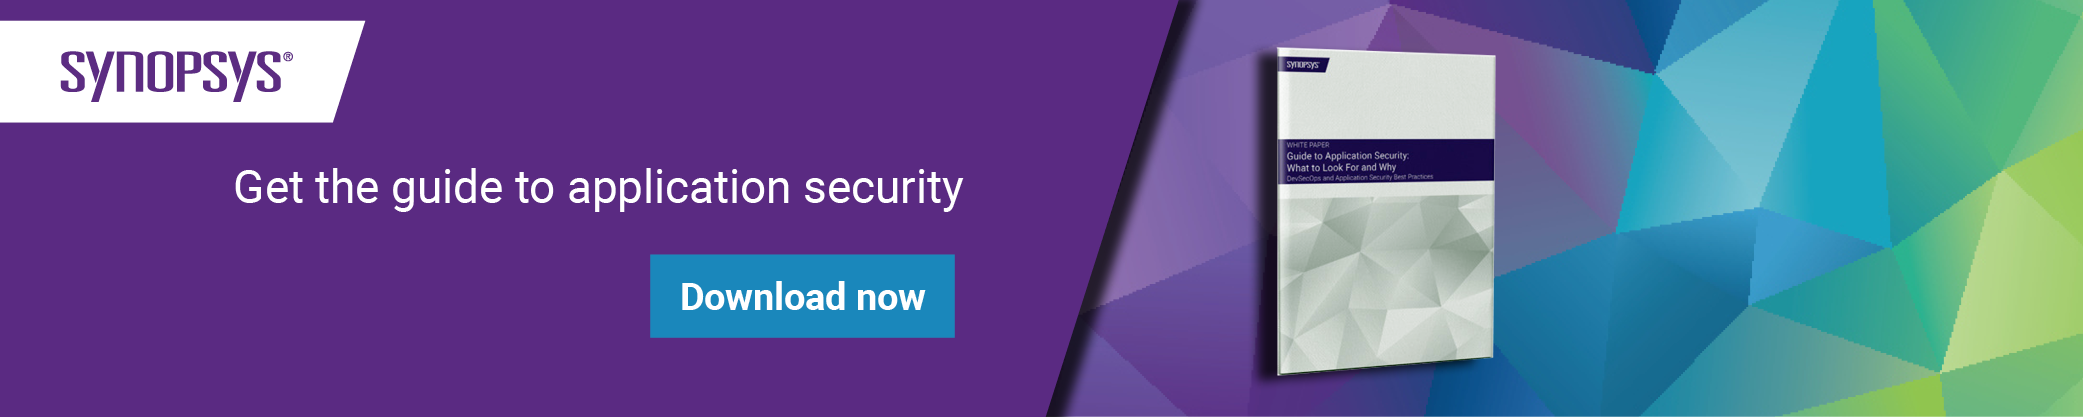 Get the guide to application security | Synopsys